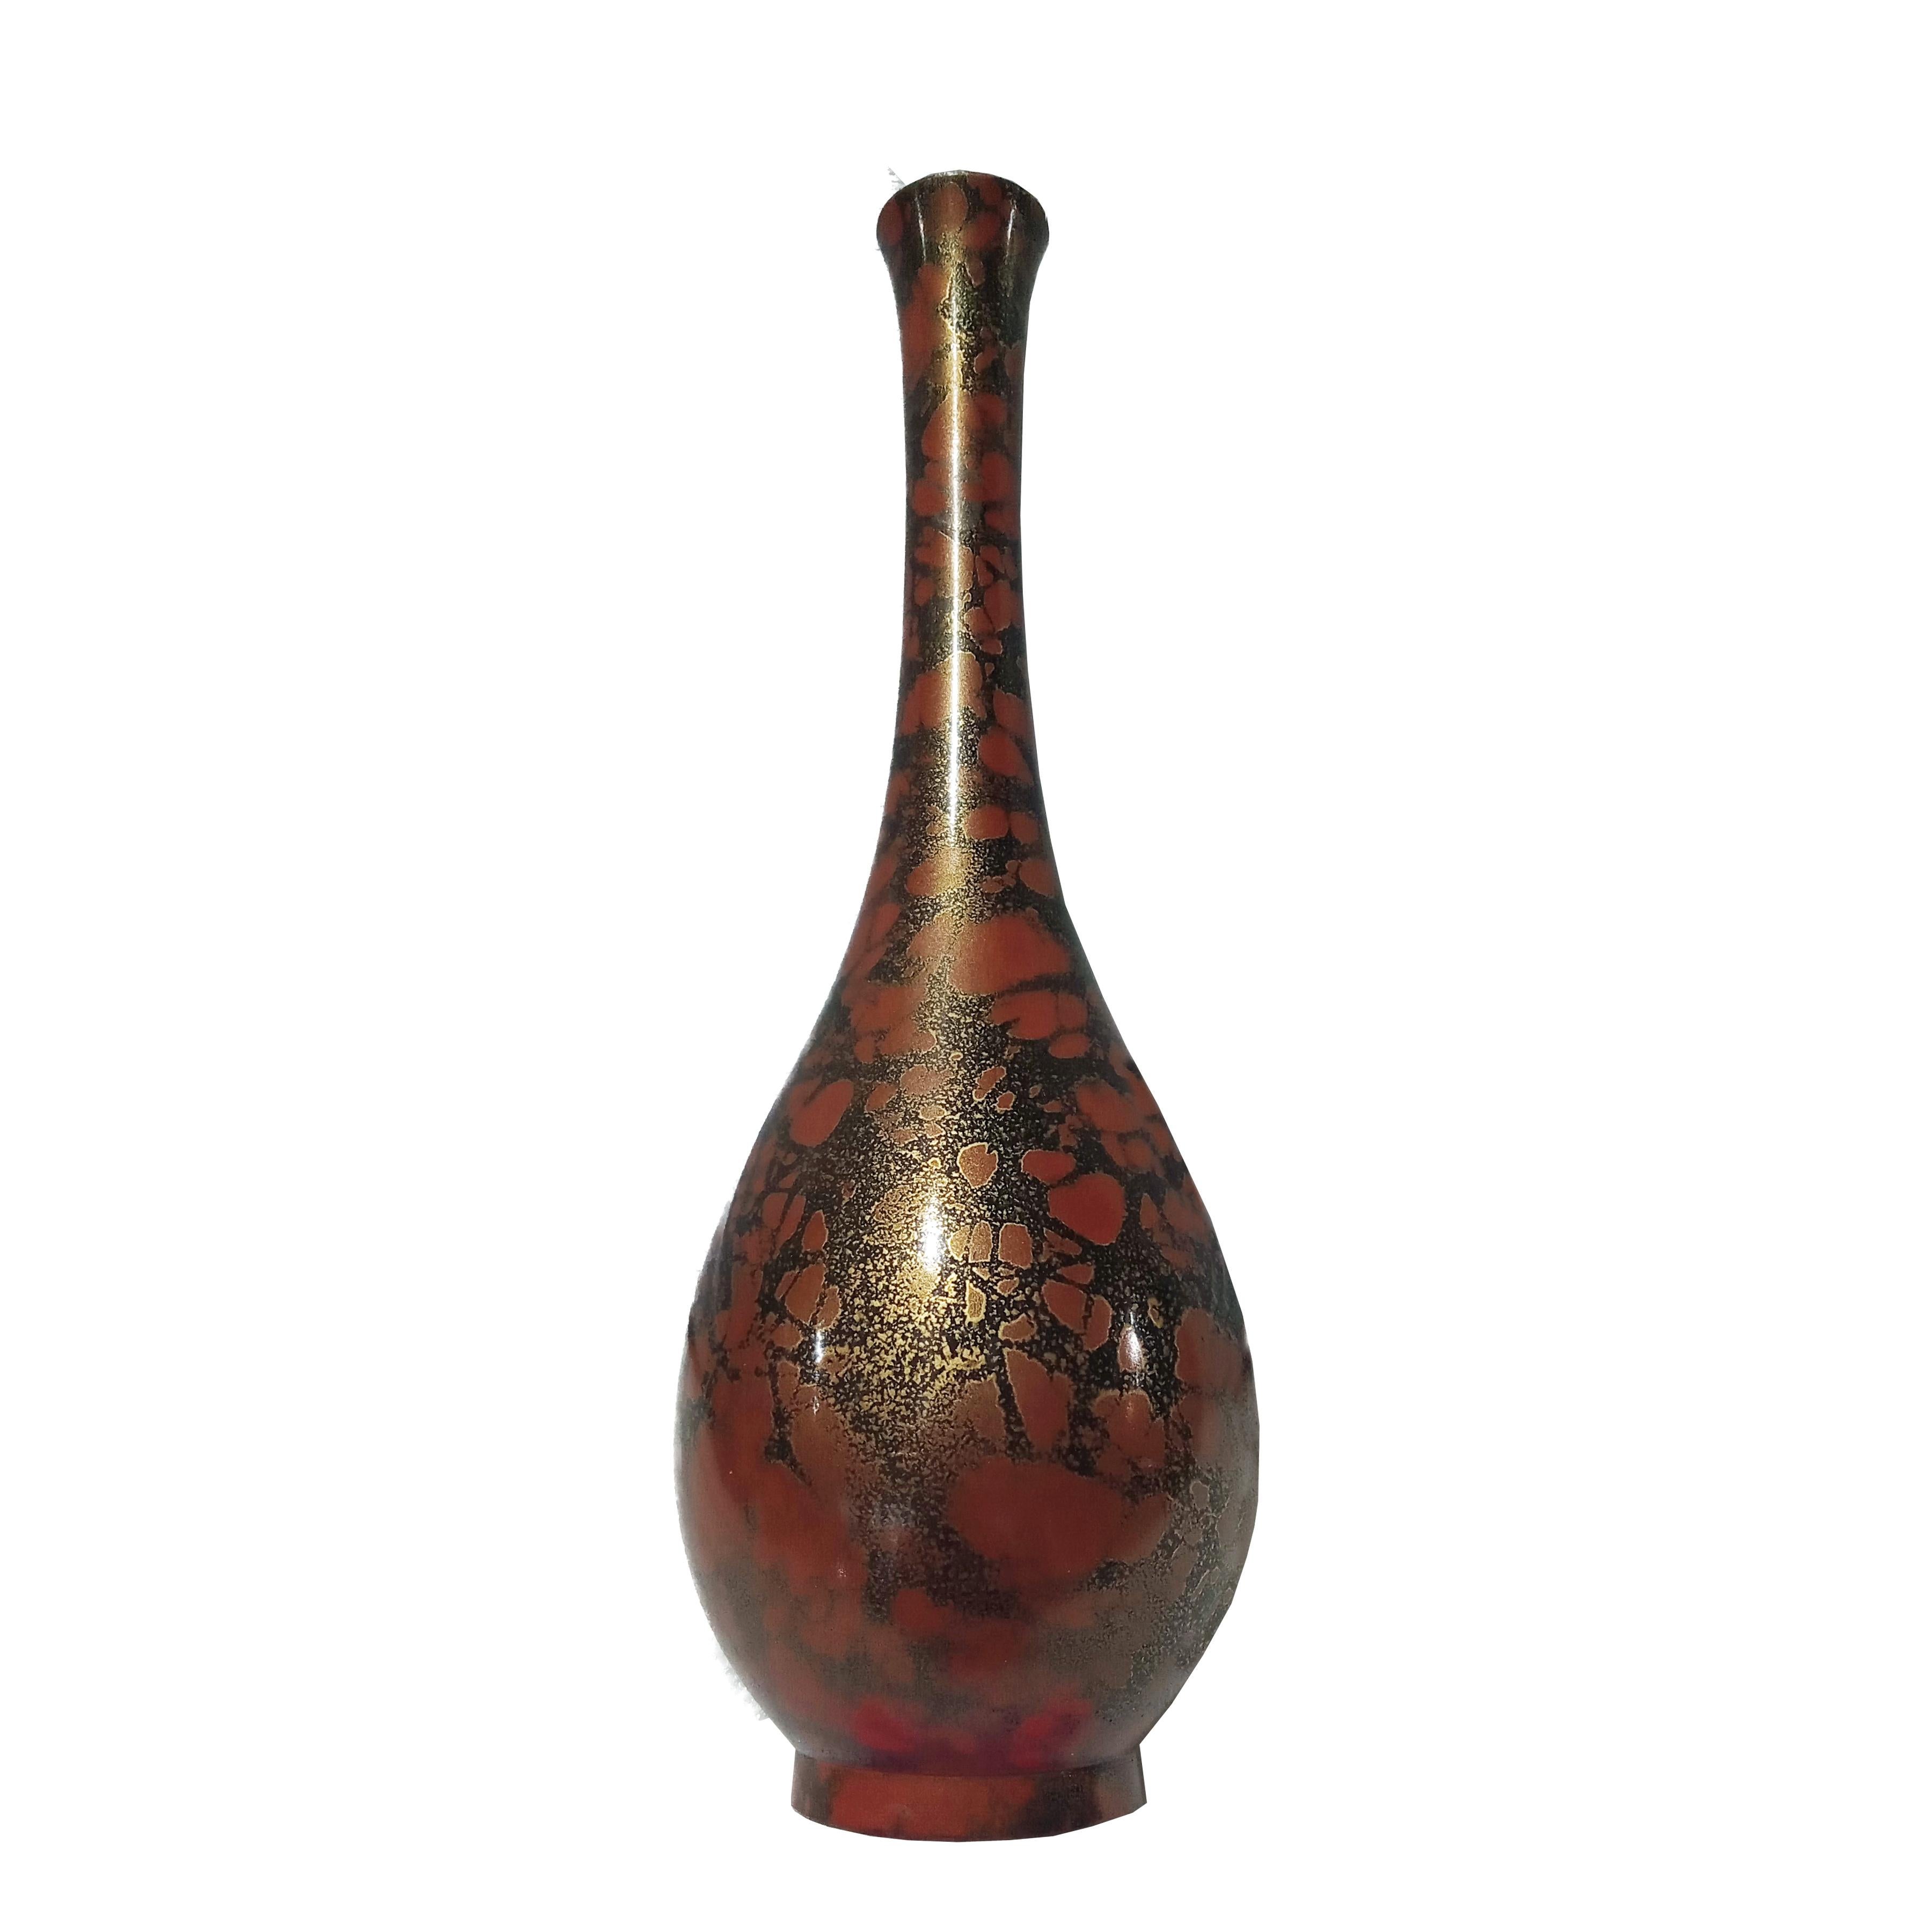 A fabulous Ikebana brass vase, hand-crafted in Japan, Showa Period. Oval shape. The finish is Murashido, a centuries-old technique that consists in quenching the cast brass in hot oil and smoke it with rice straw, which gives the vase that beautiful